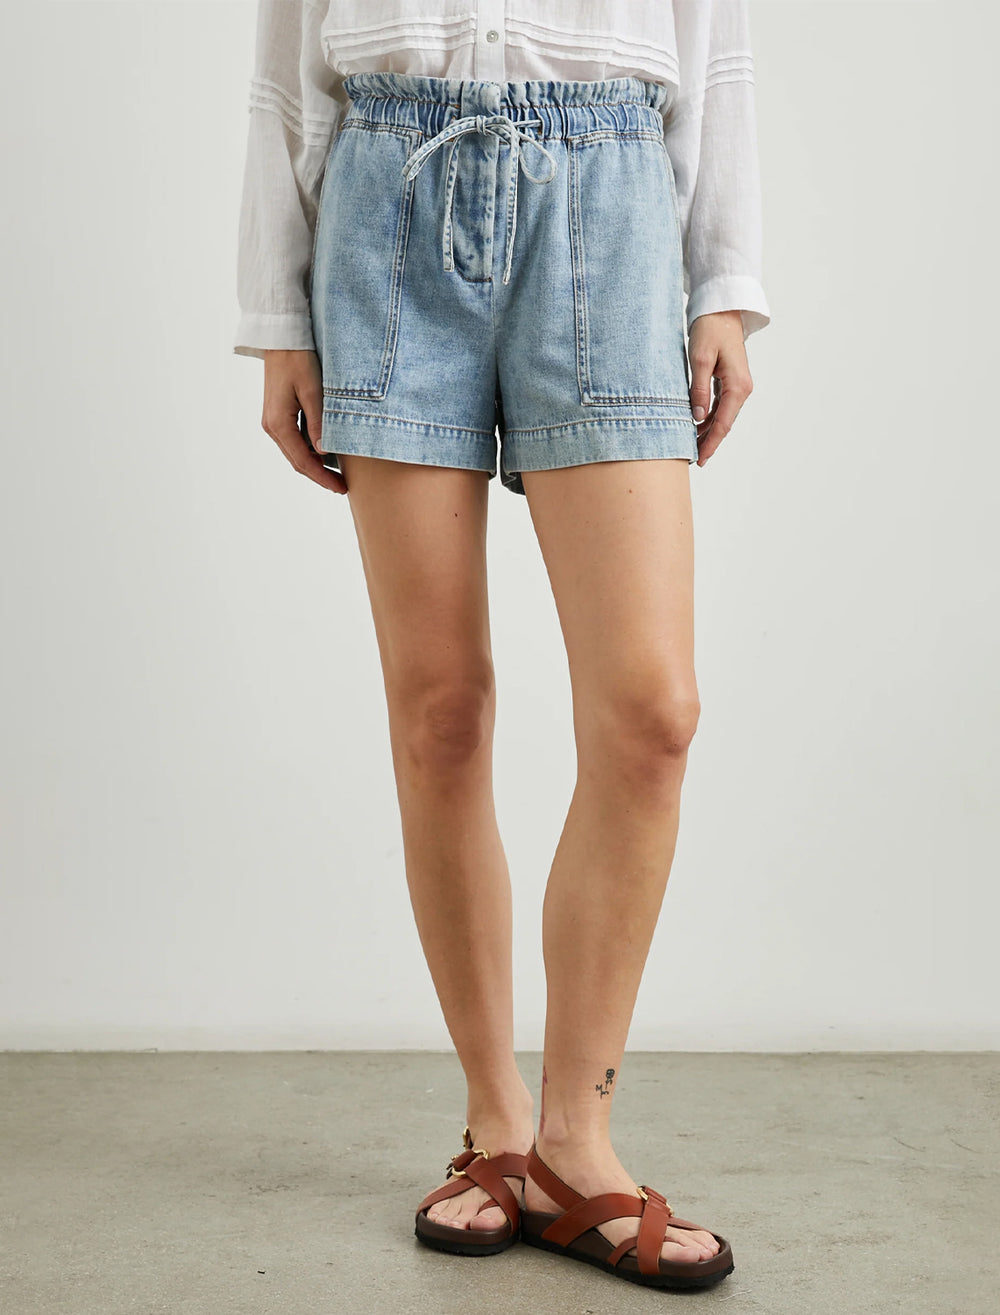 Model wearing Rails' foster shorts in faded indigo chambray.